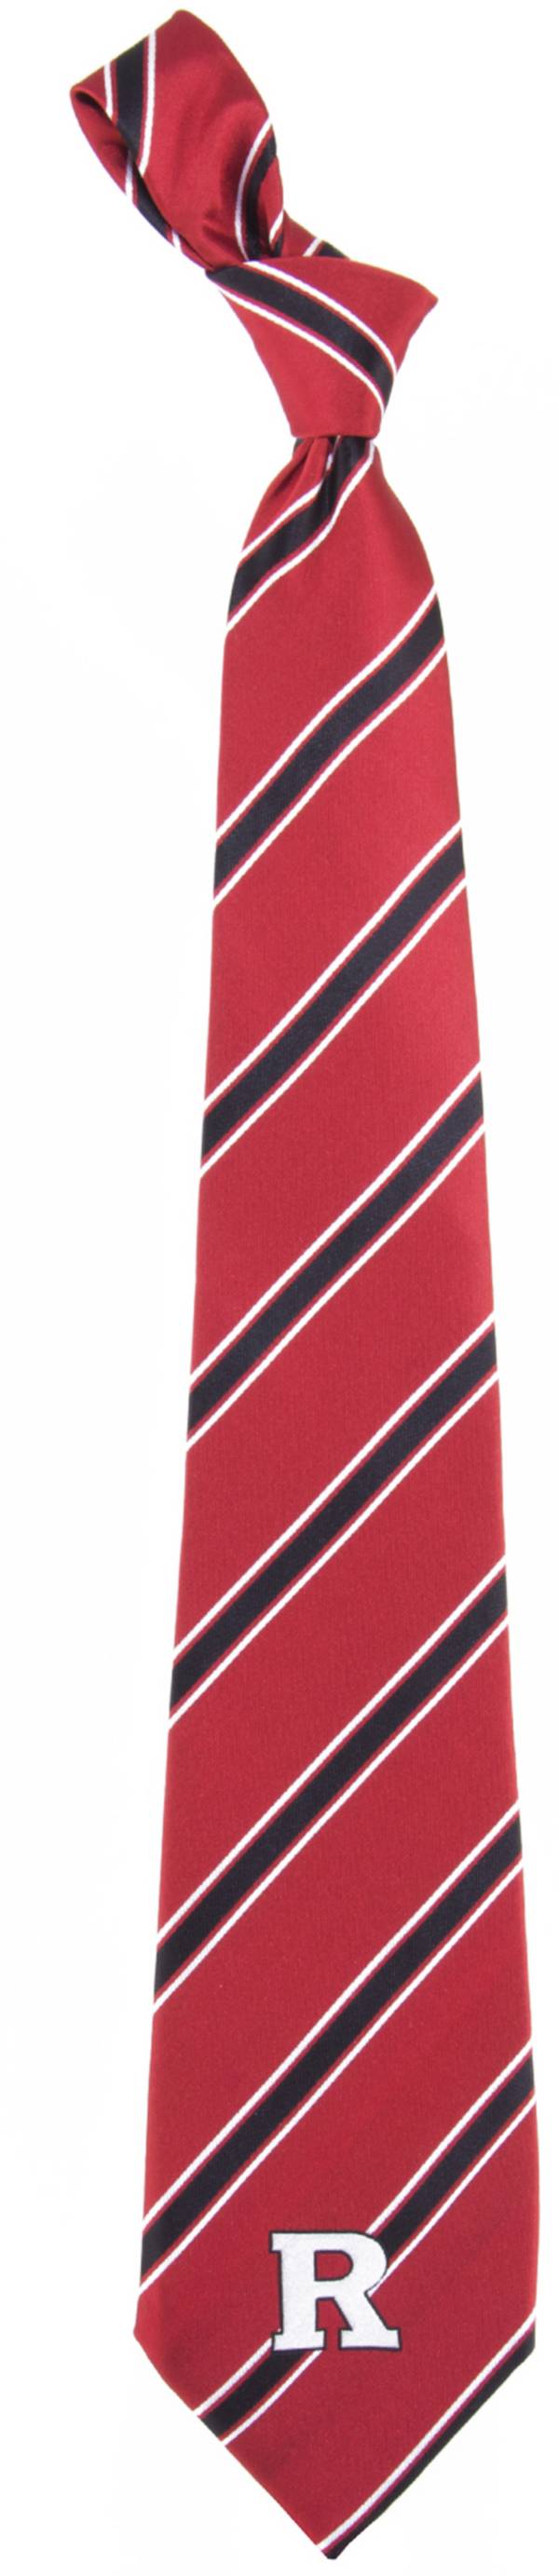 Eagles Wings Rutgers Scarlet Knights Woven Poly 1 Necktie product image